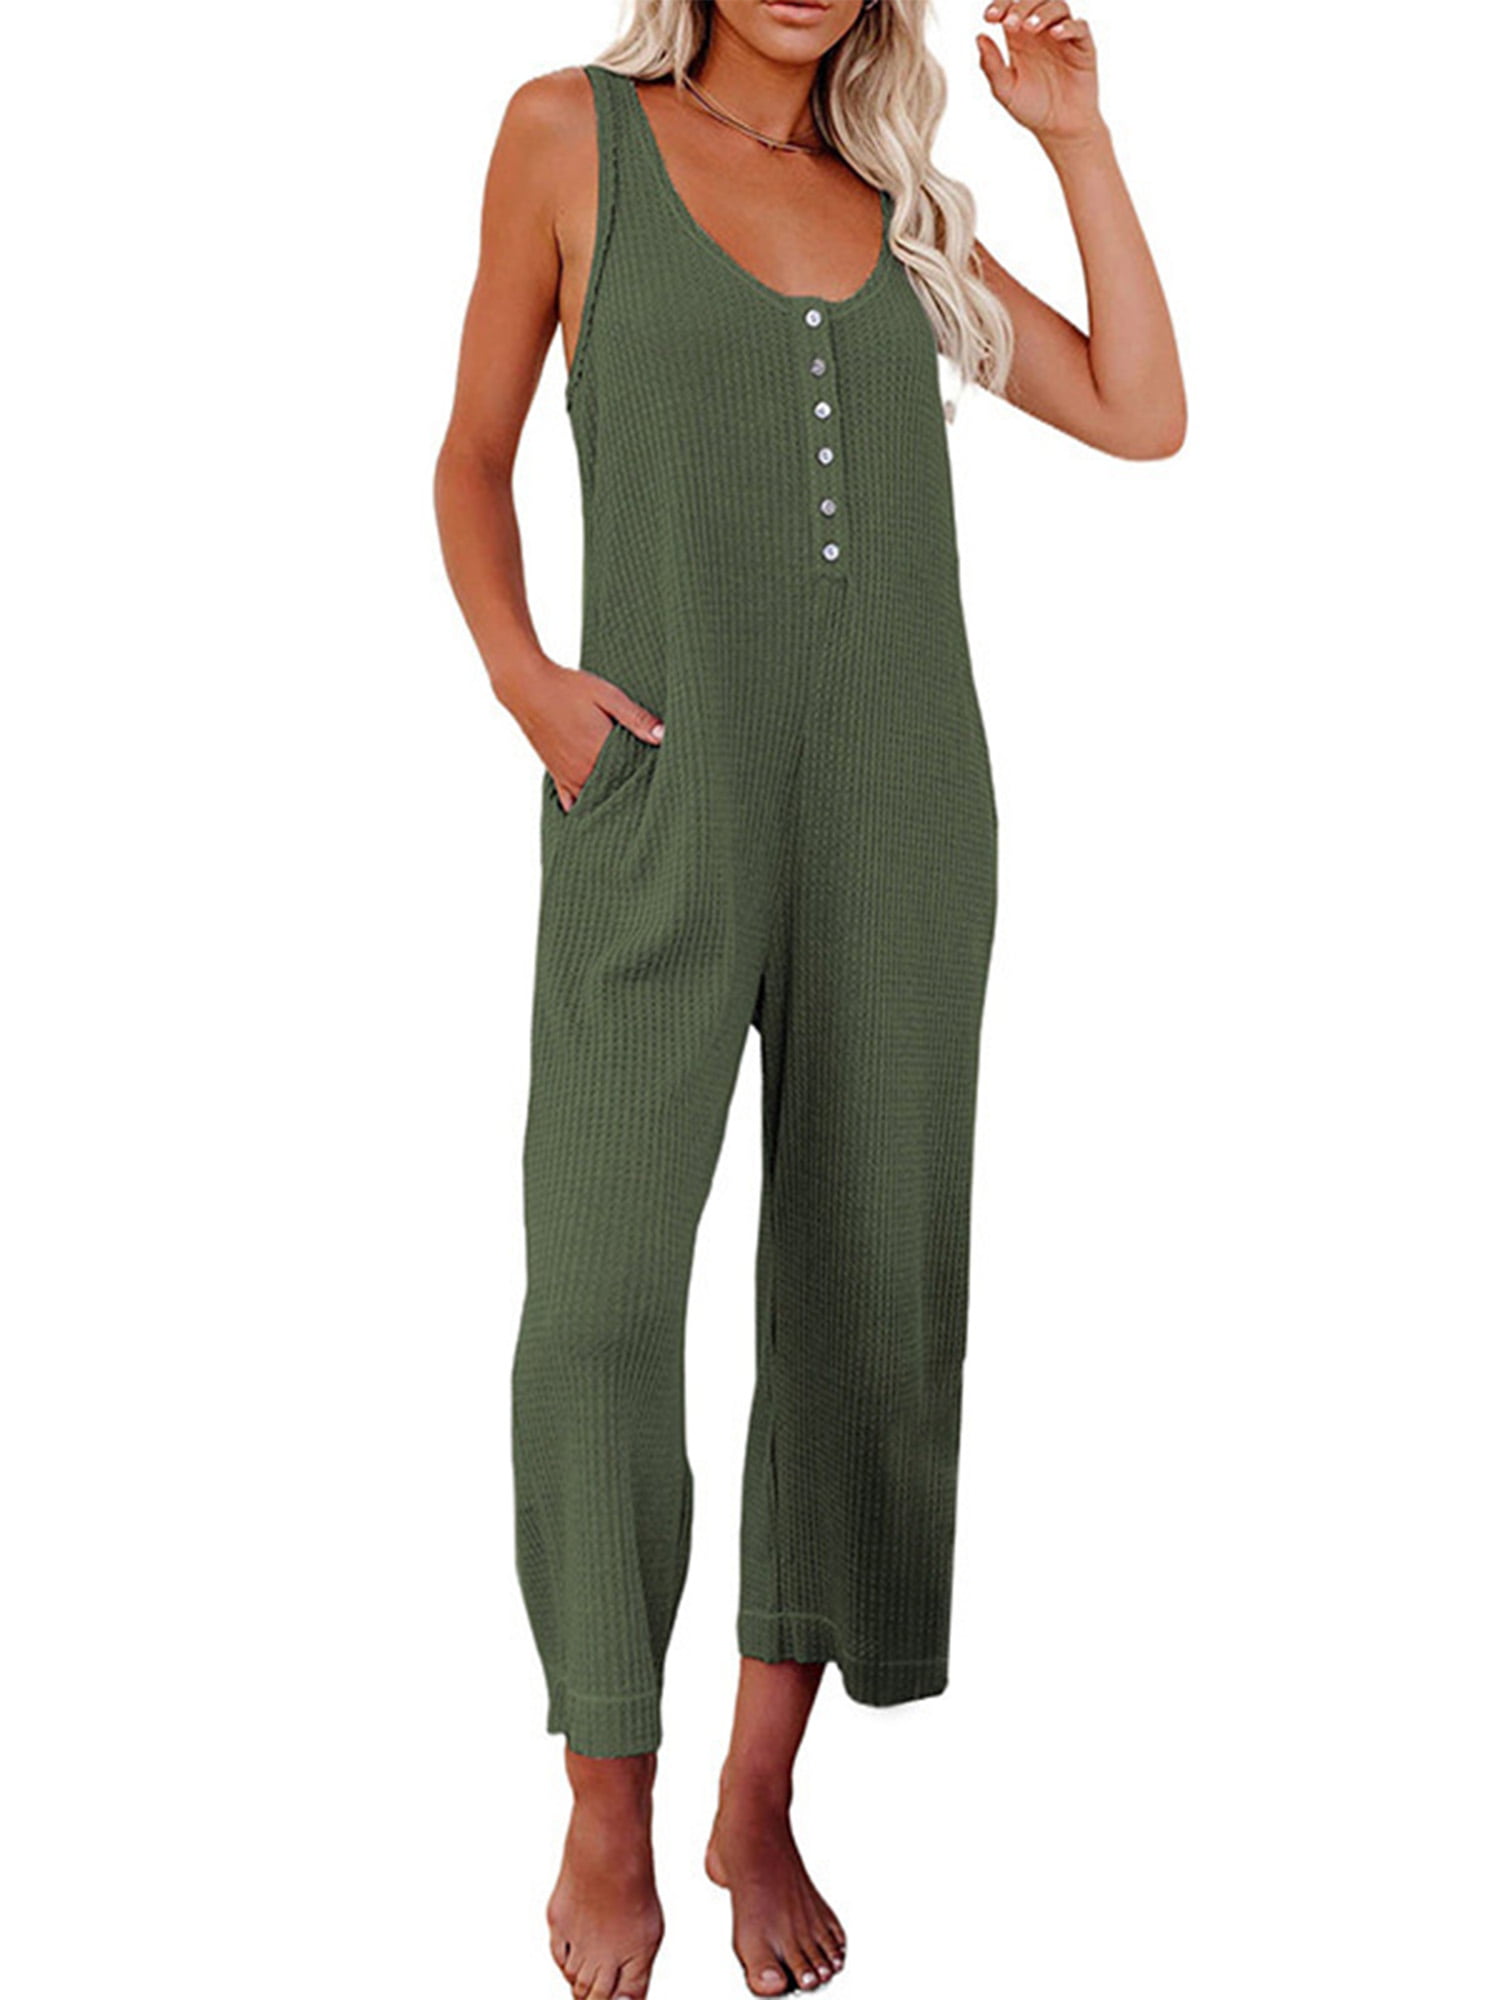 JustJ Jumpsuit Womens Casual Embroidered Tape Detail Romper Pockets Playsuits Women Overalls Bodysuit 